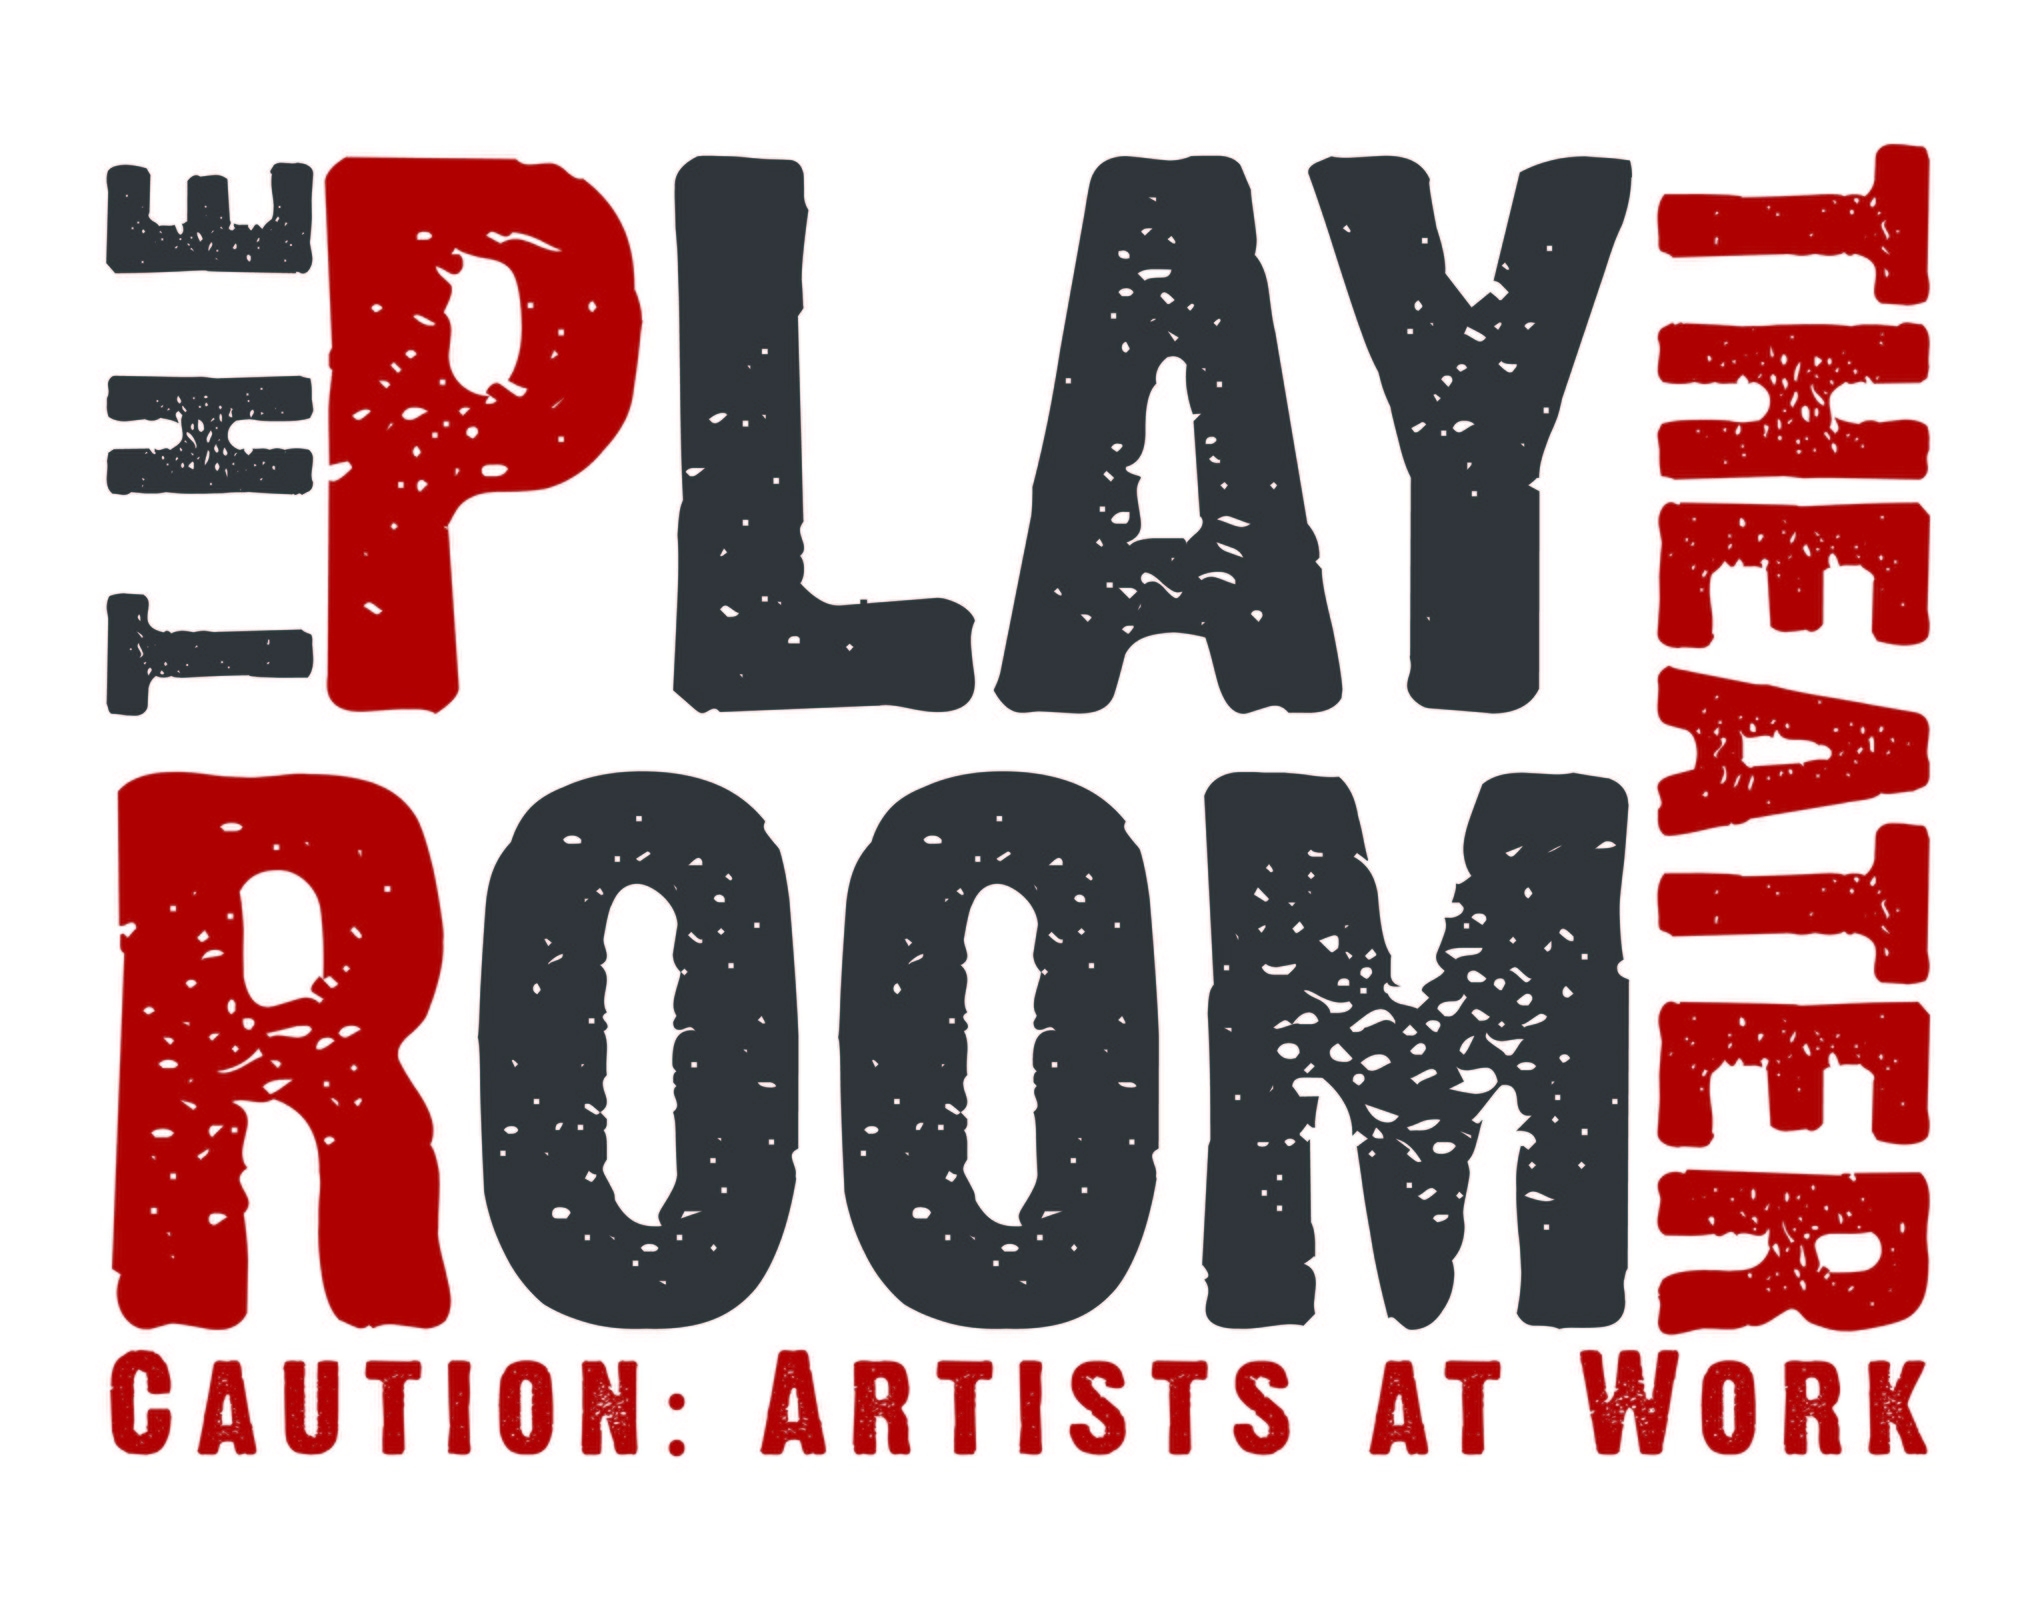 The Playroom Theater